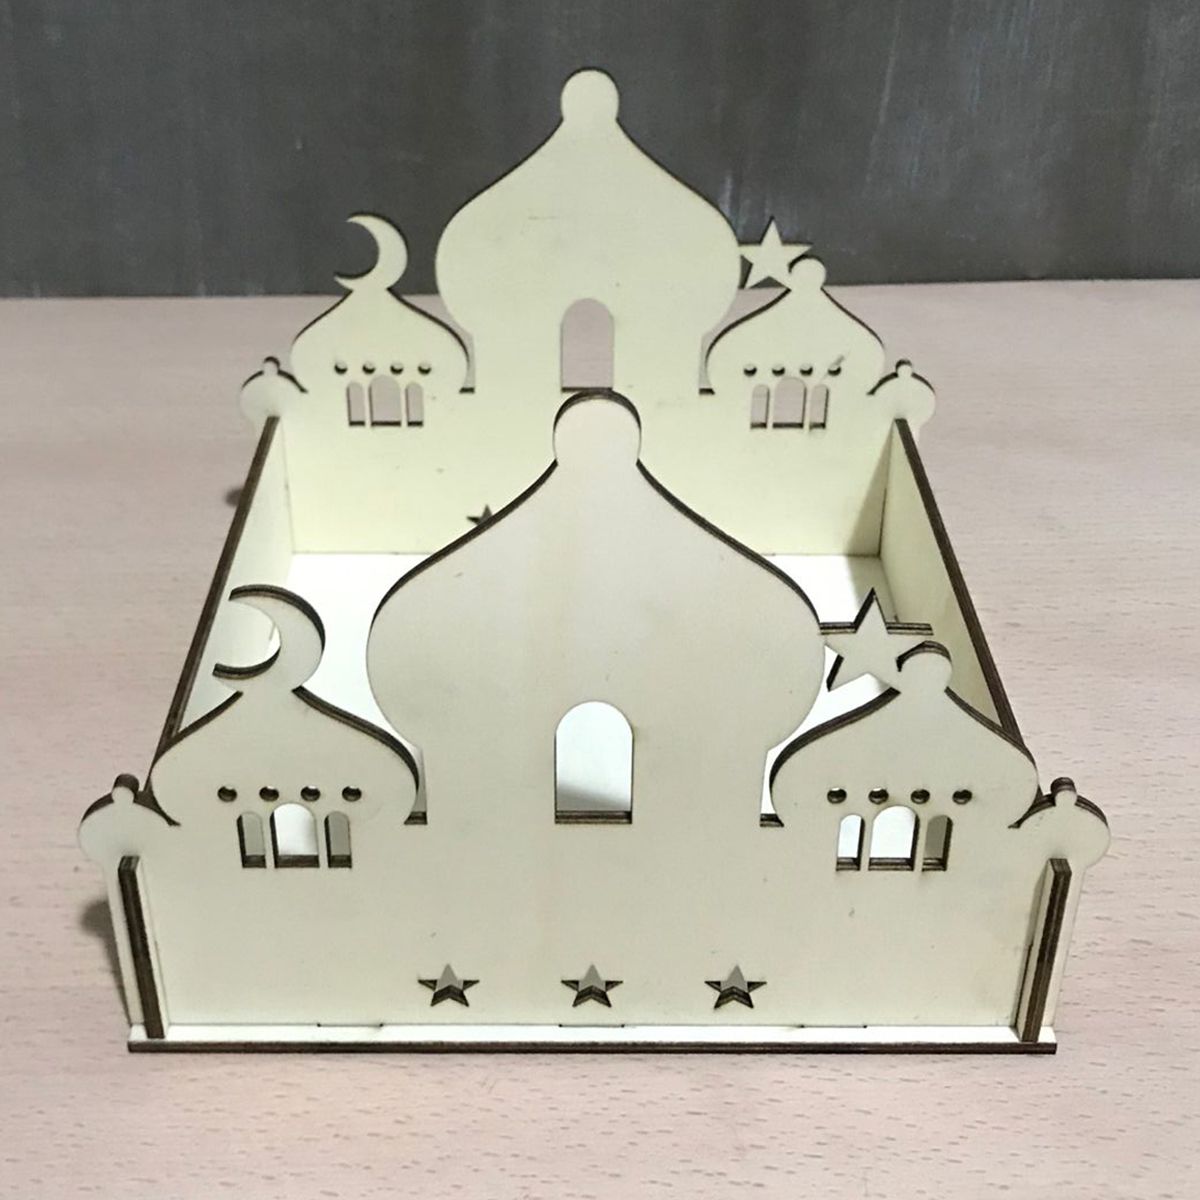 Self-Assembly-Puzzle-Wooden-Building-Model-Kits-DIY-Islamic-House-Stand-Rack-Ramadan-Gifts-Decoratio-1450275